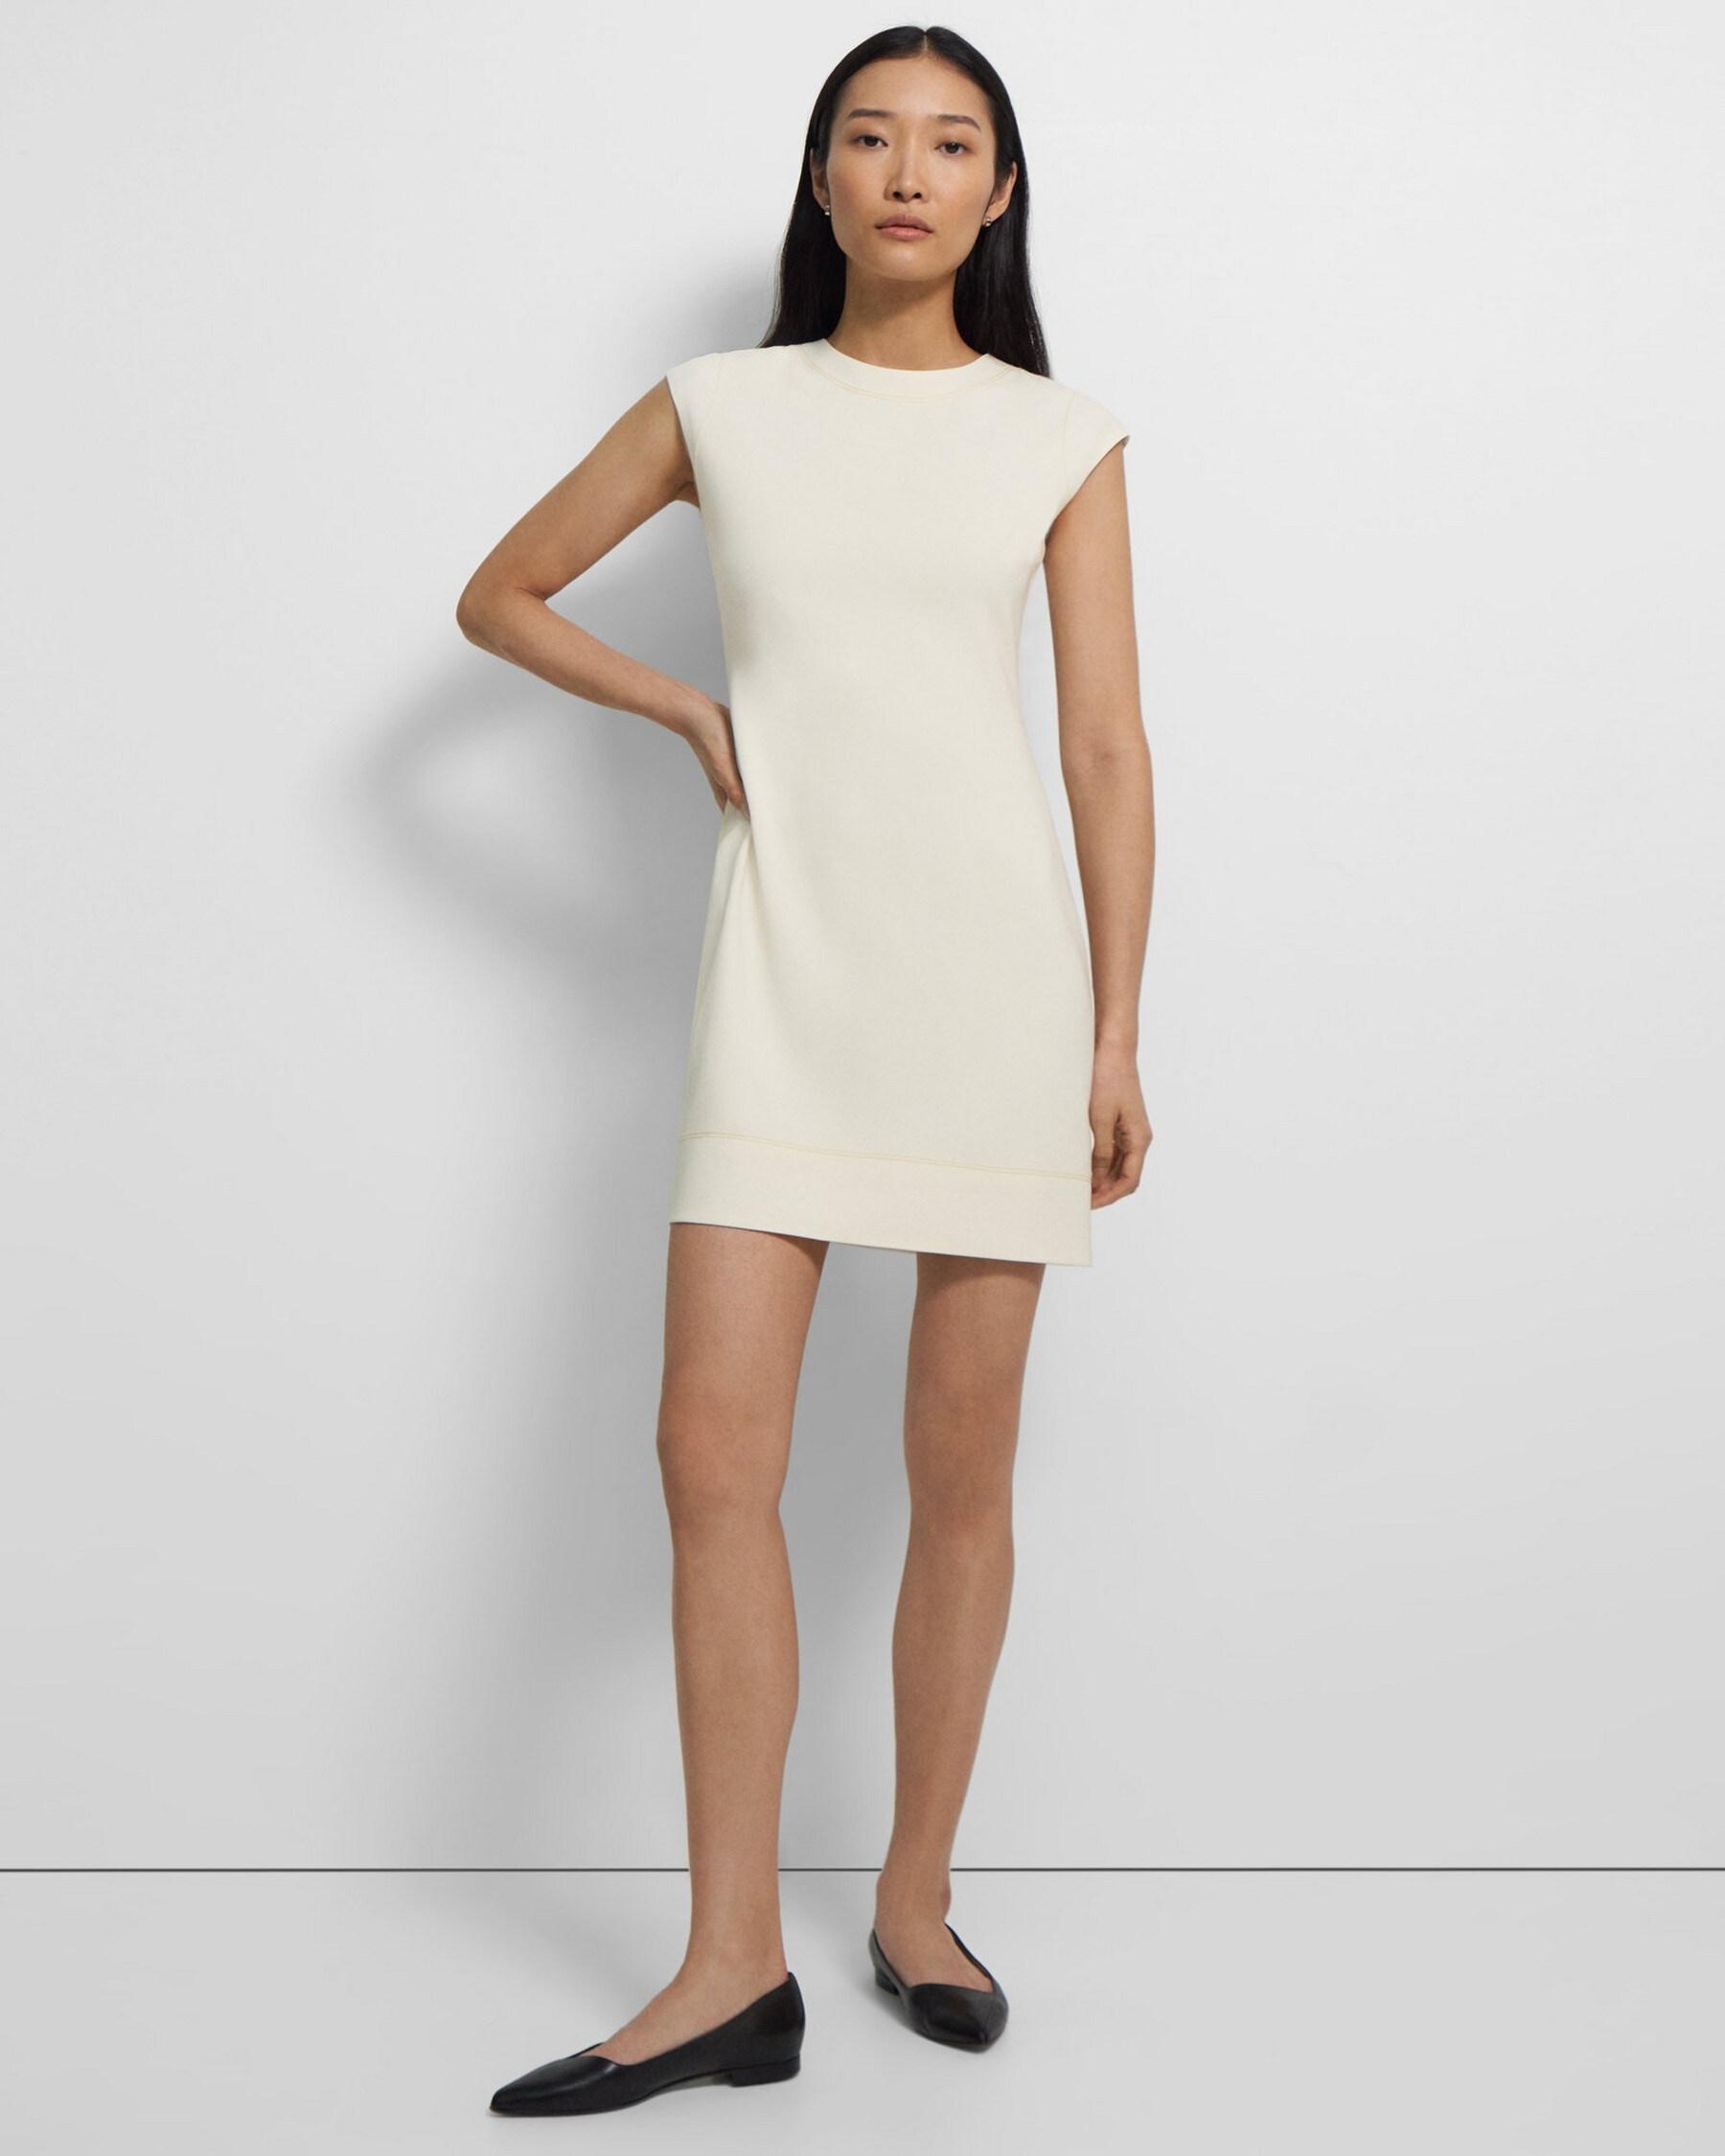 Embroidered Shift Dress in Admiral Crepe